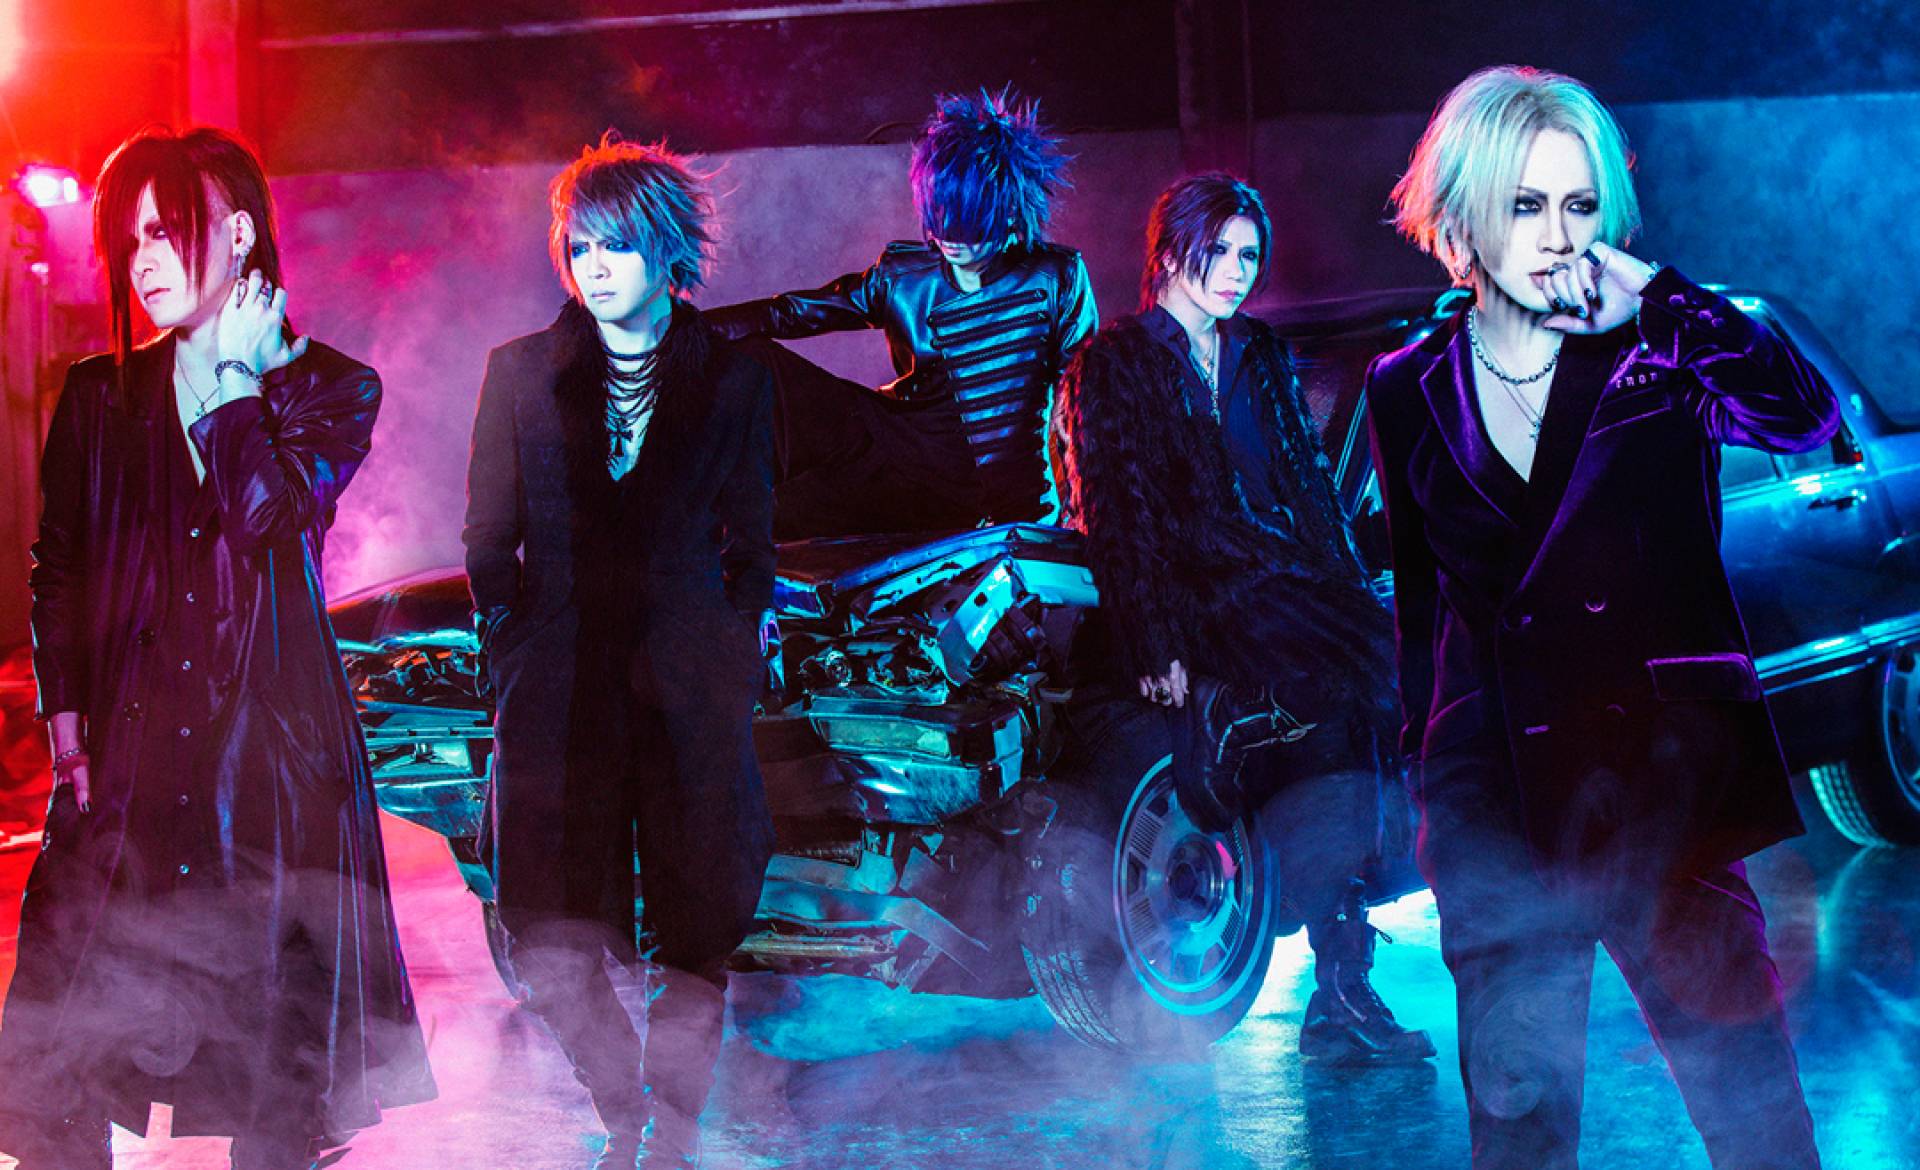 The band members of The GazettE with one of the members sitting on the bonnet of a car which has partial damage to the front of it. 